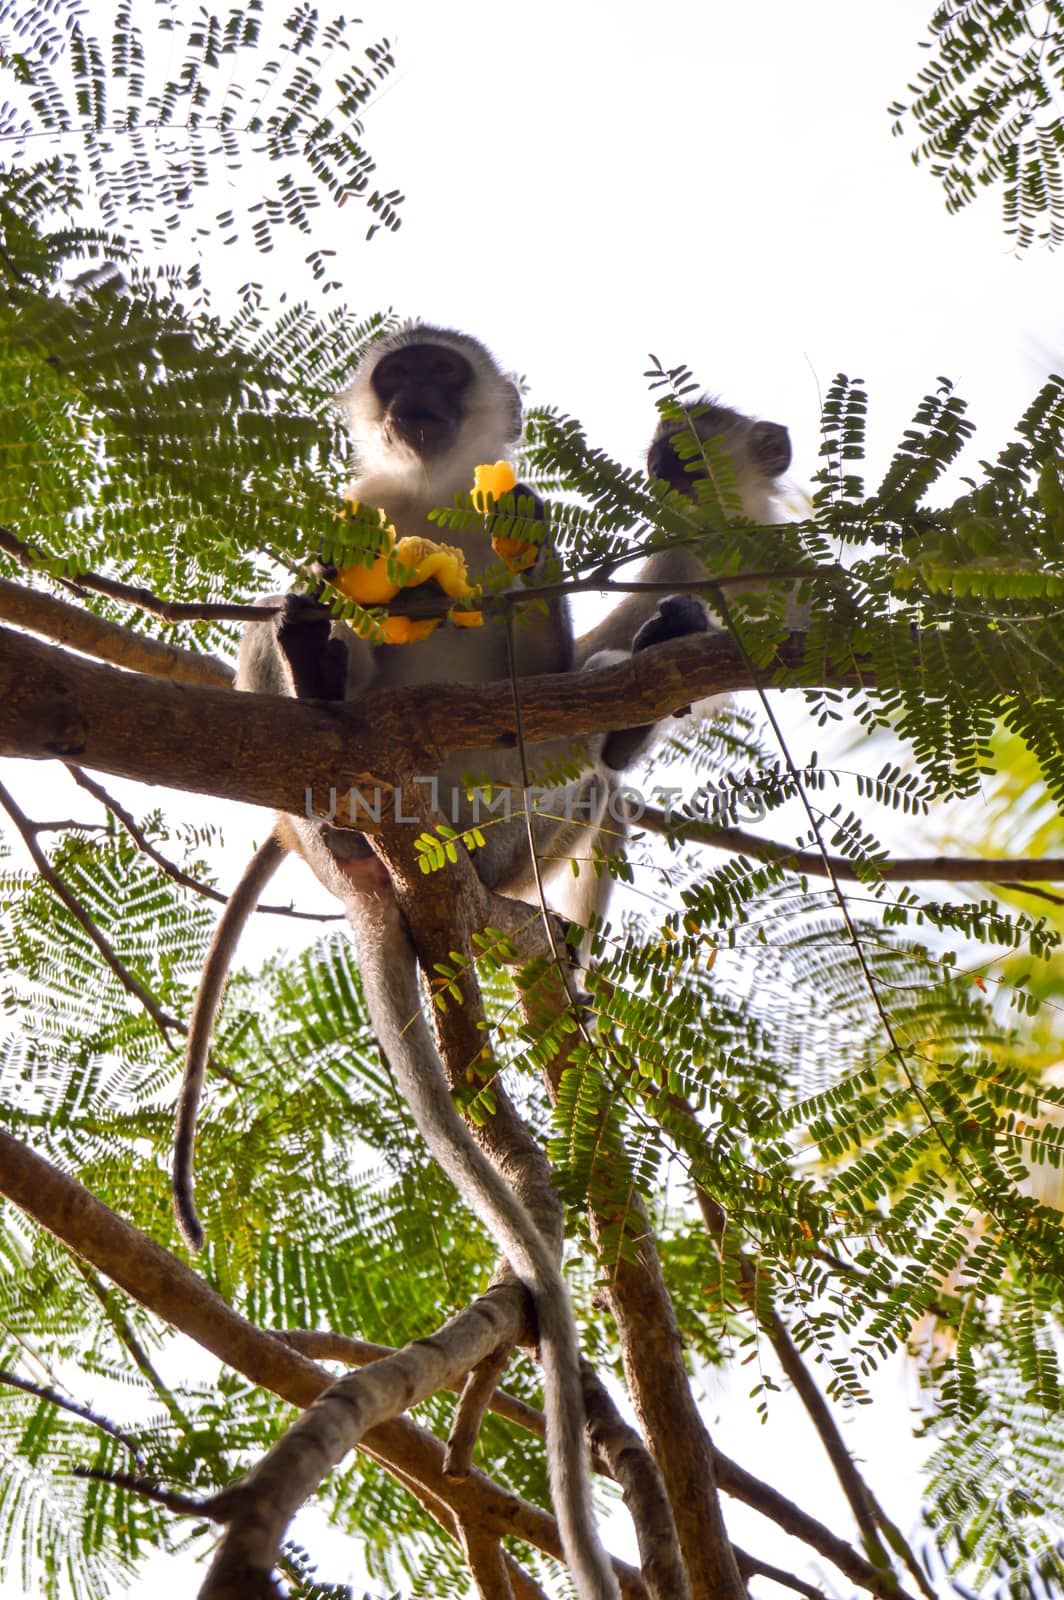 Monkey vervet and her cub on a tree eating a mango in a park in Mombasa, Kenya